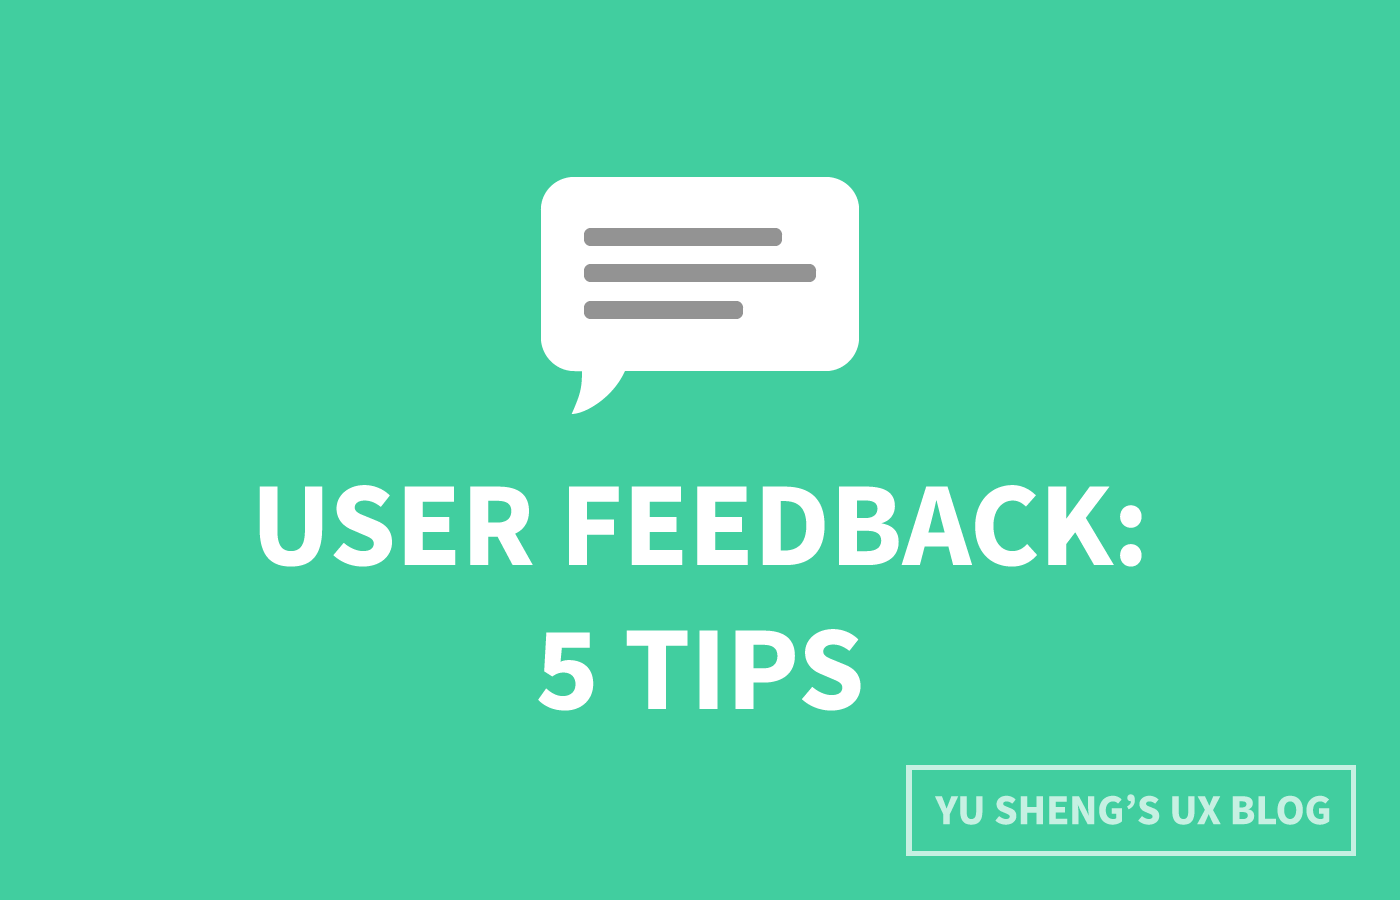 5 tips to get the most out of user feedback